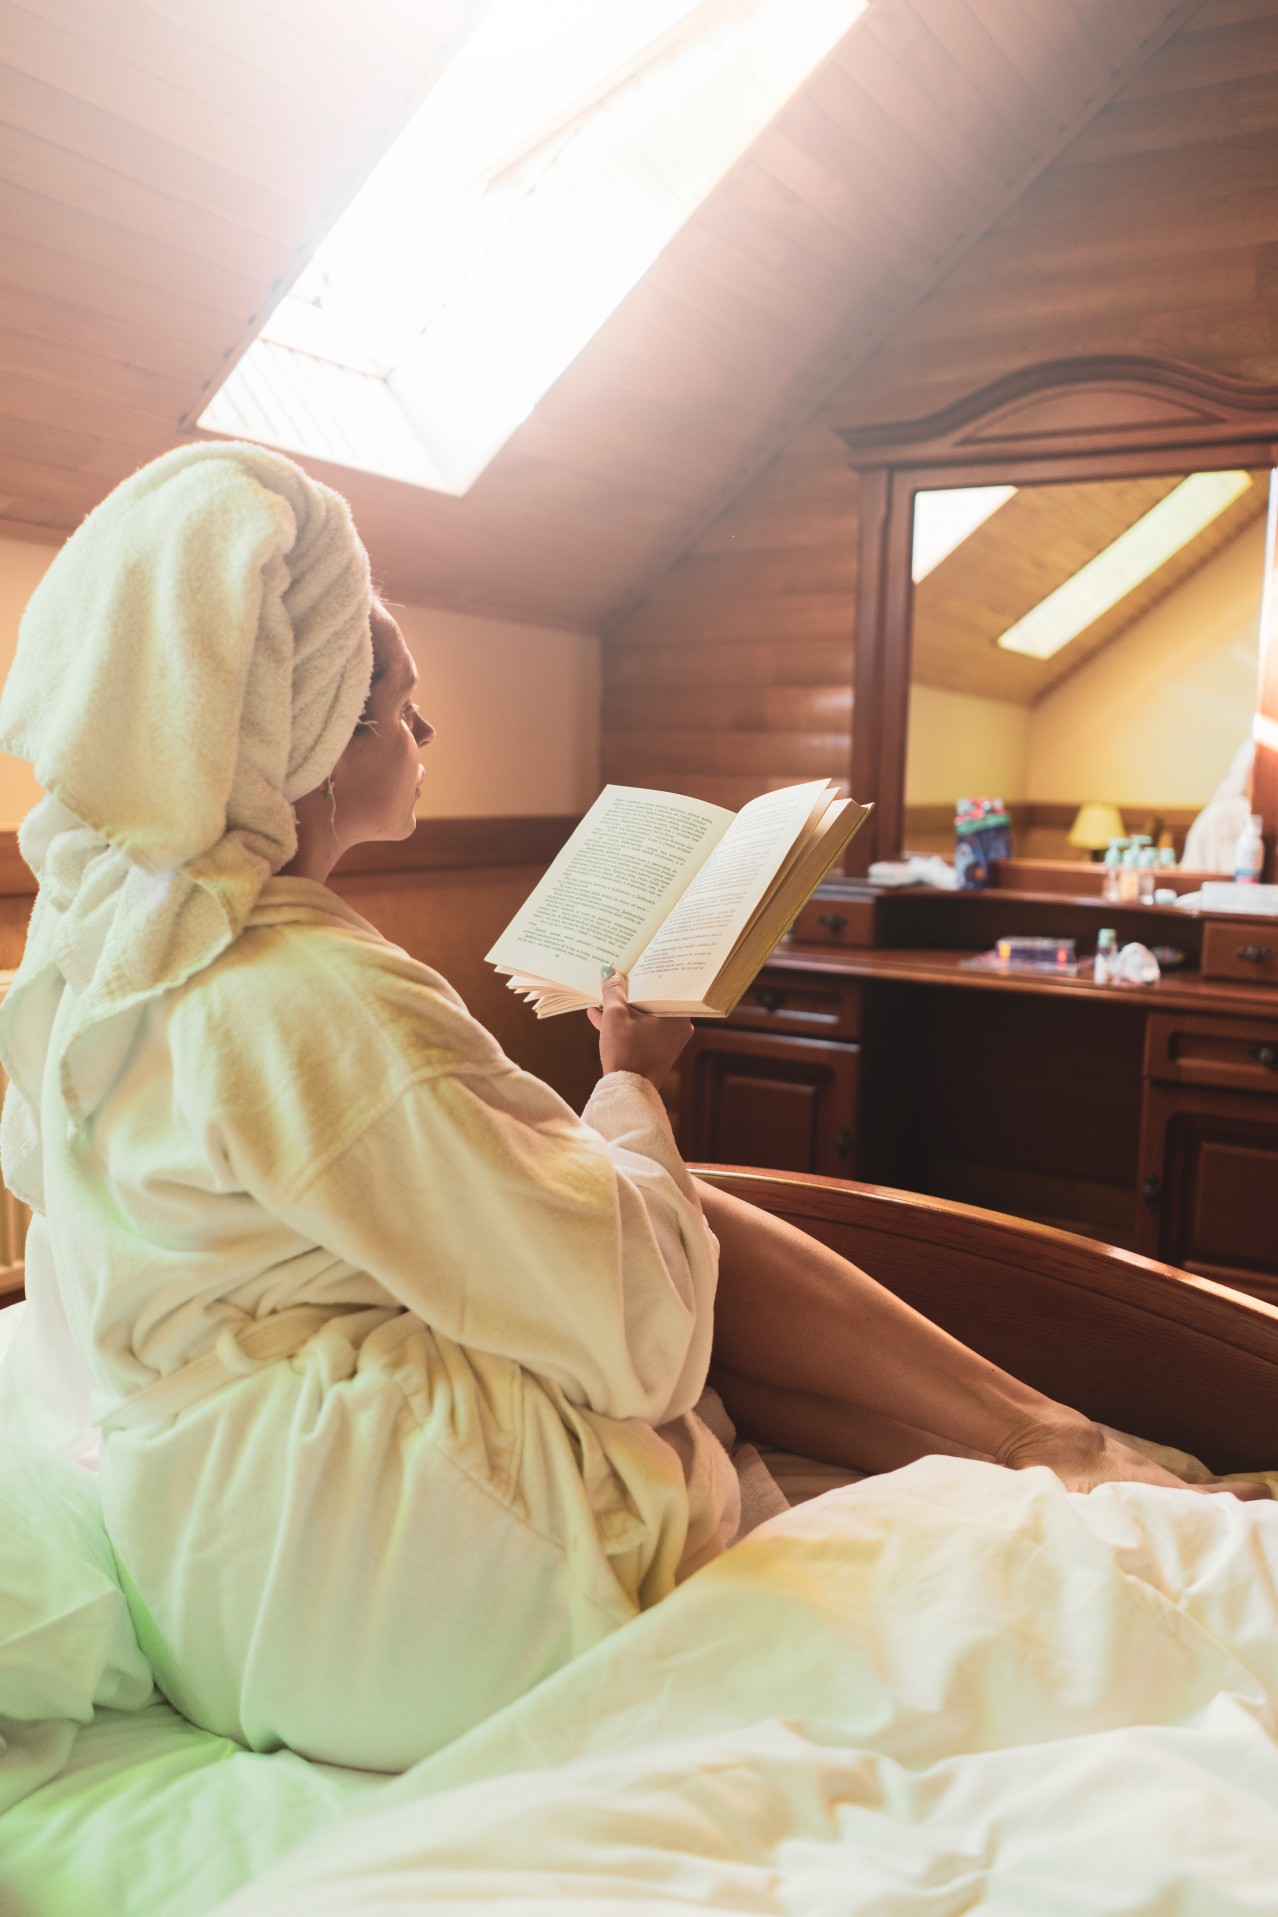 Woman in the bathrobe reading in the bed